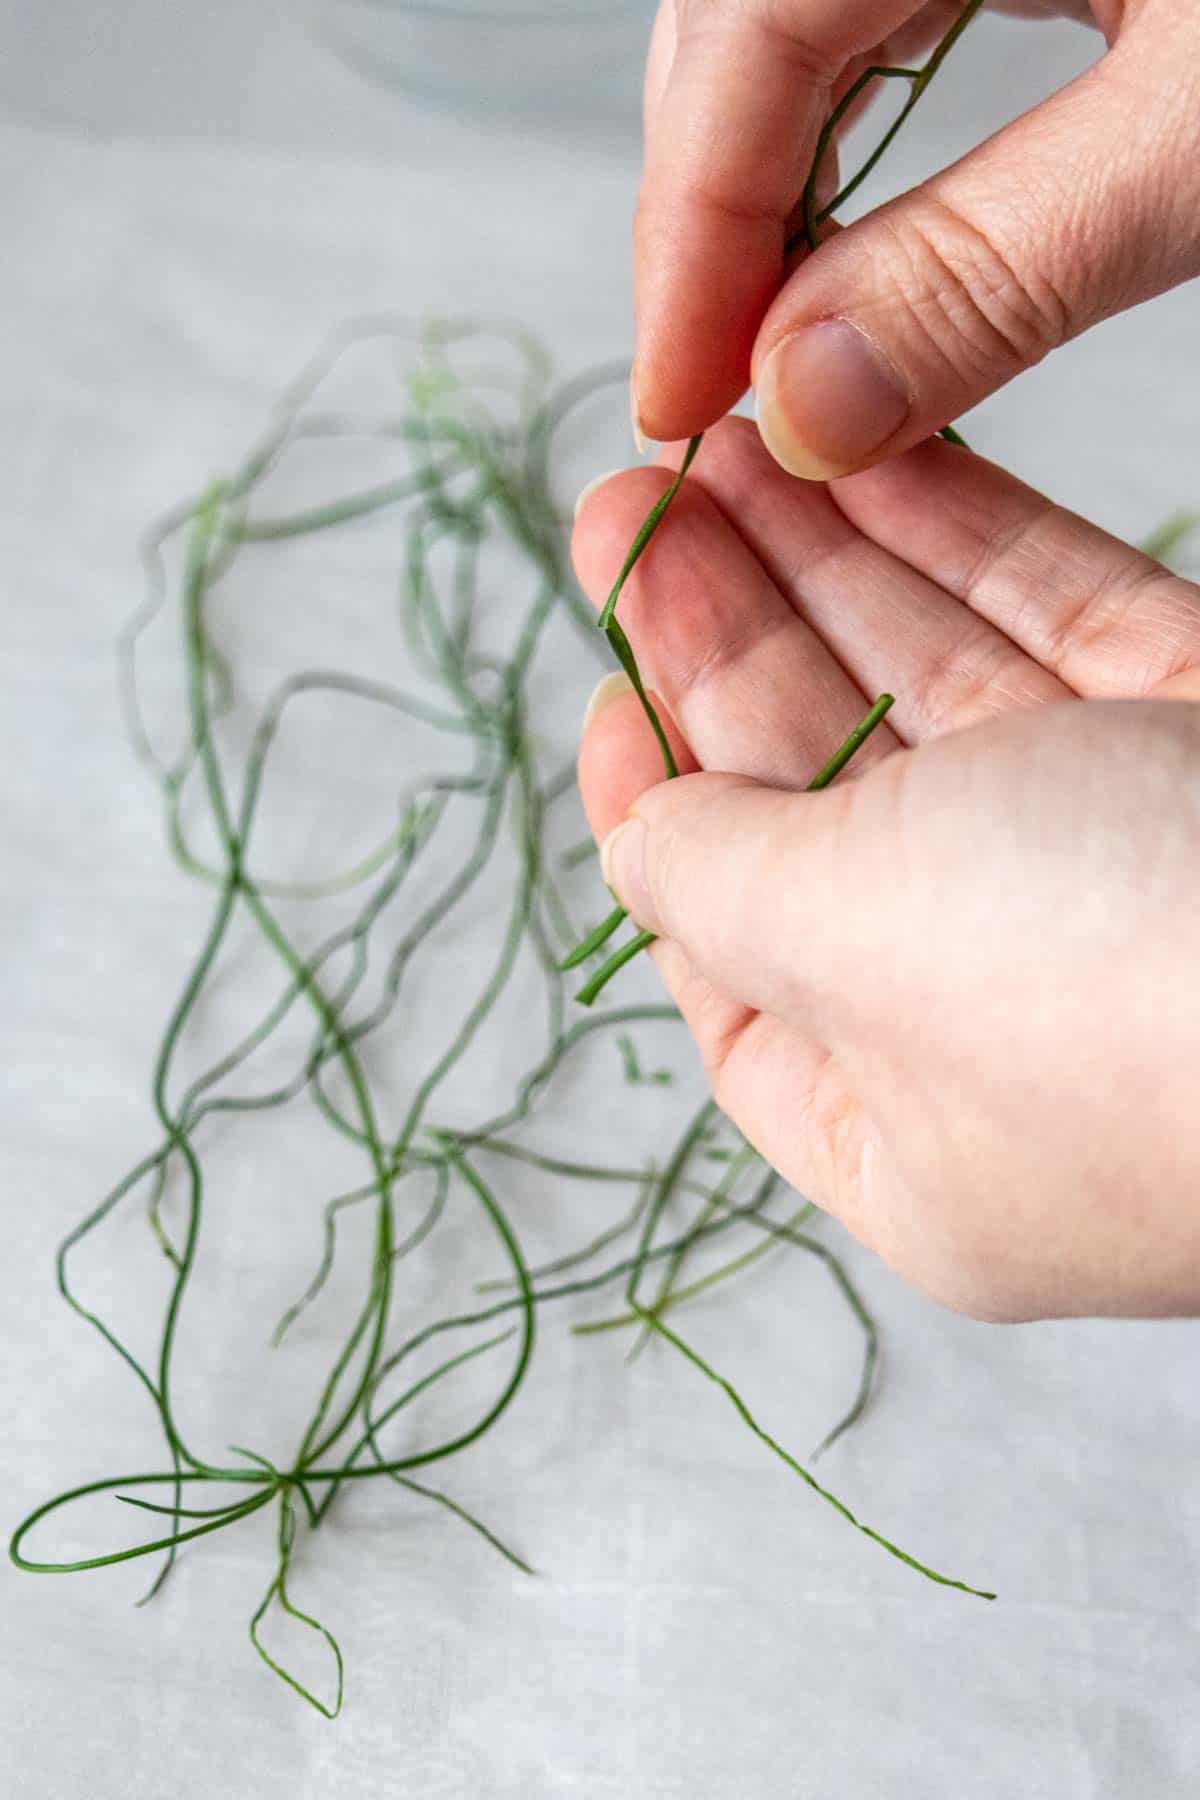 Caucasian hands breaking dried chives into pieces.